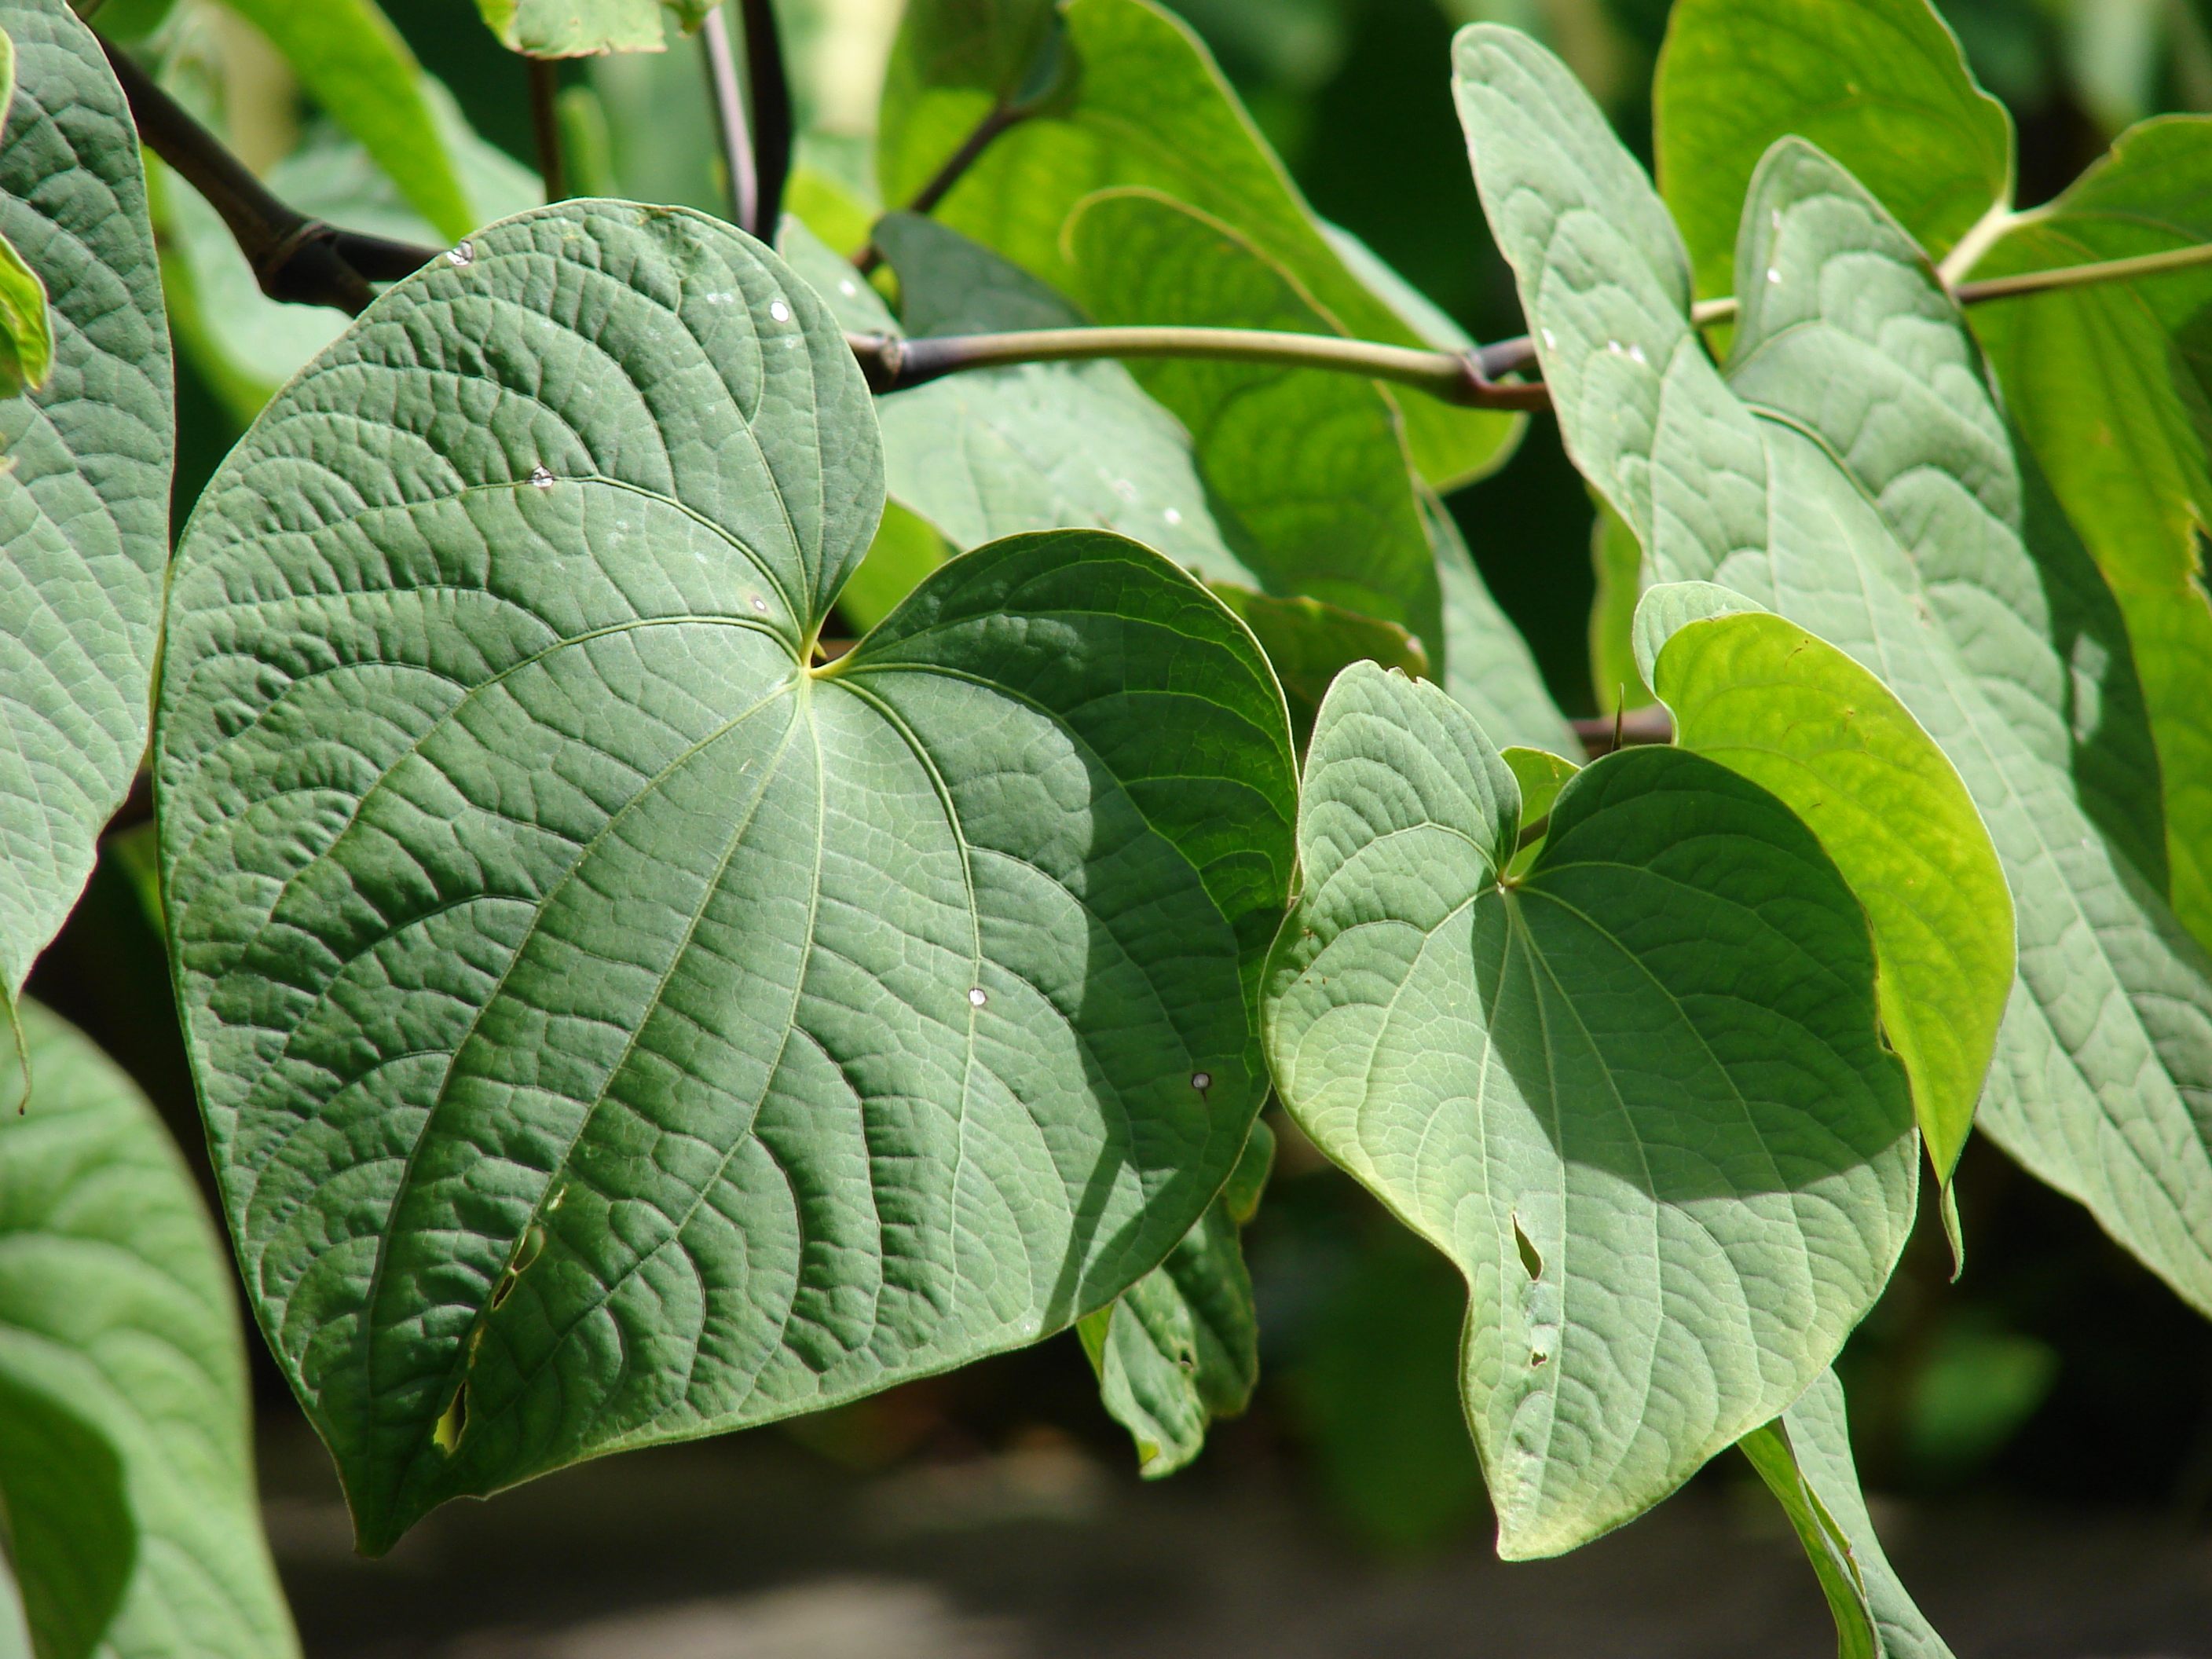 The heart-shaped leaves of the kava plant.